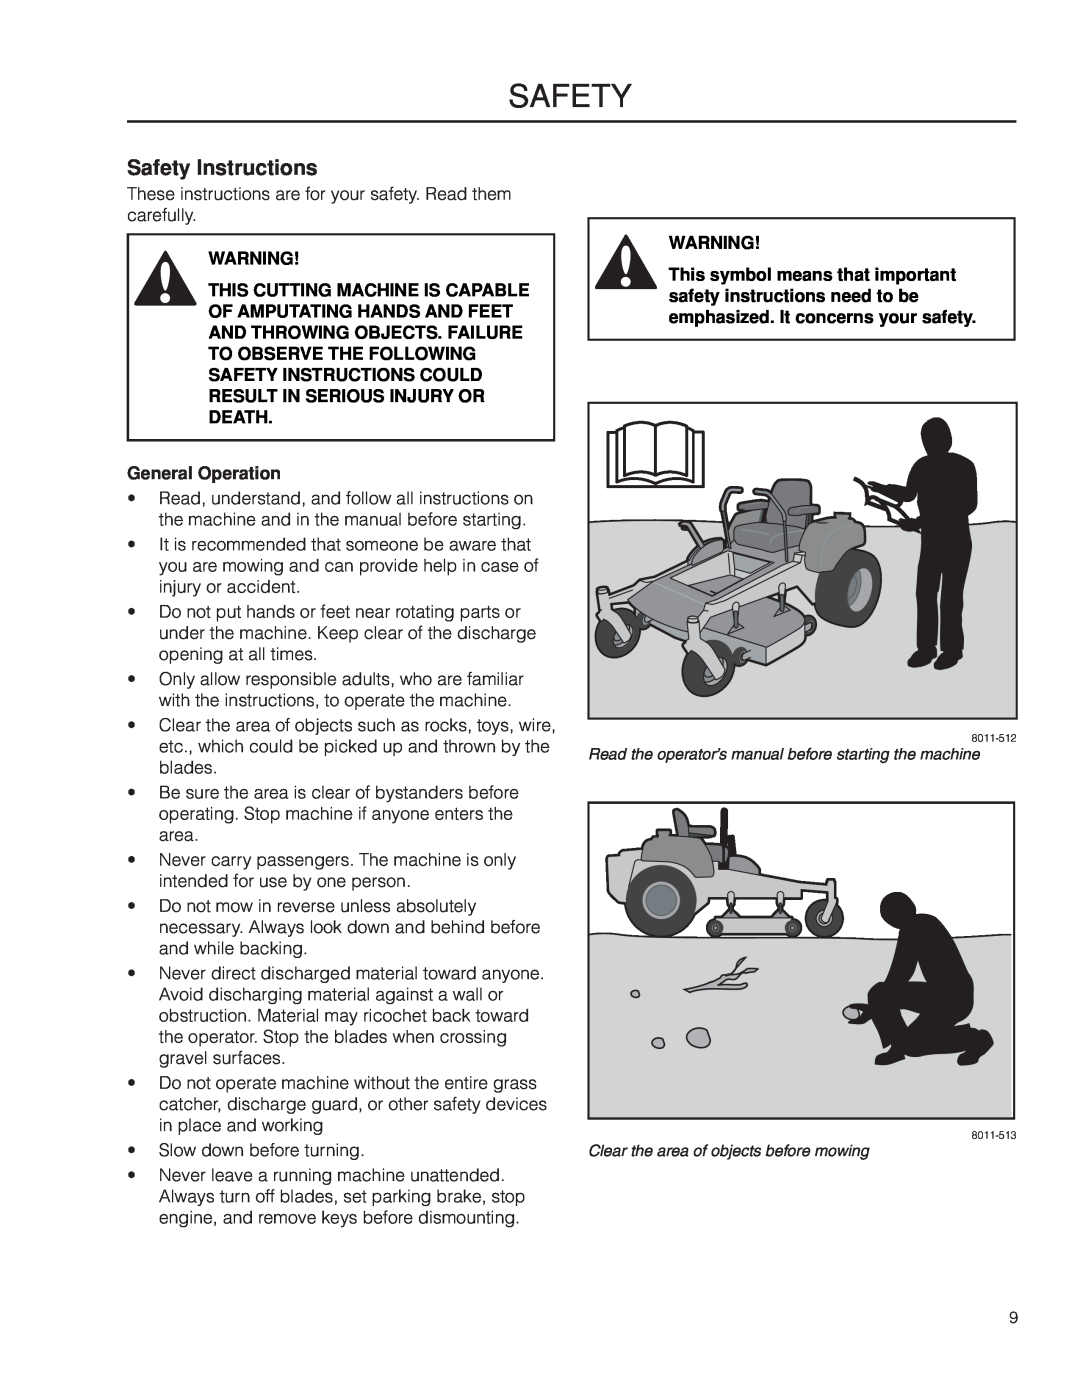 Husqvarna RZ3019 BF/966582101 Safety Instructions, This Cutting Machine Is Capable, Of Amputating Hands And Feet 